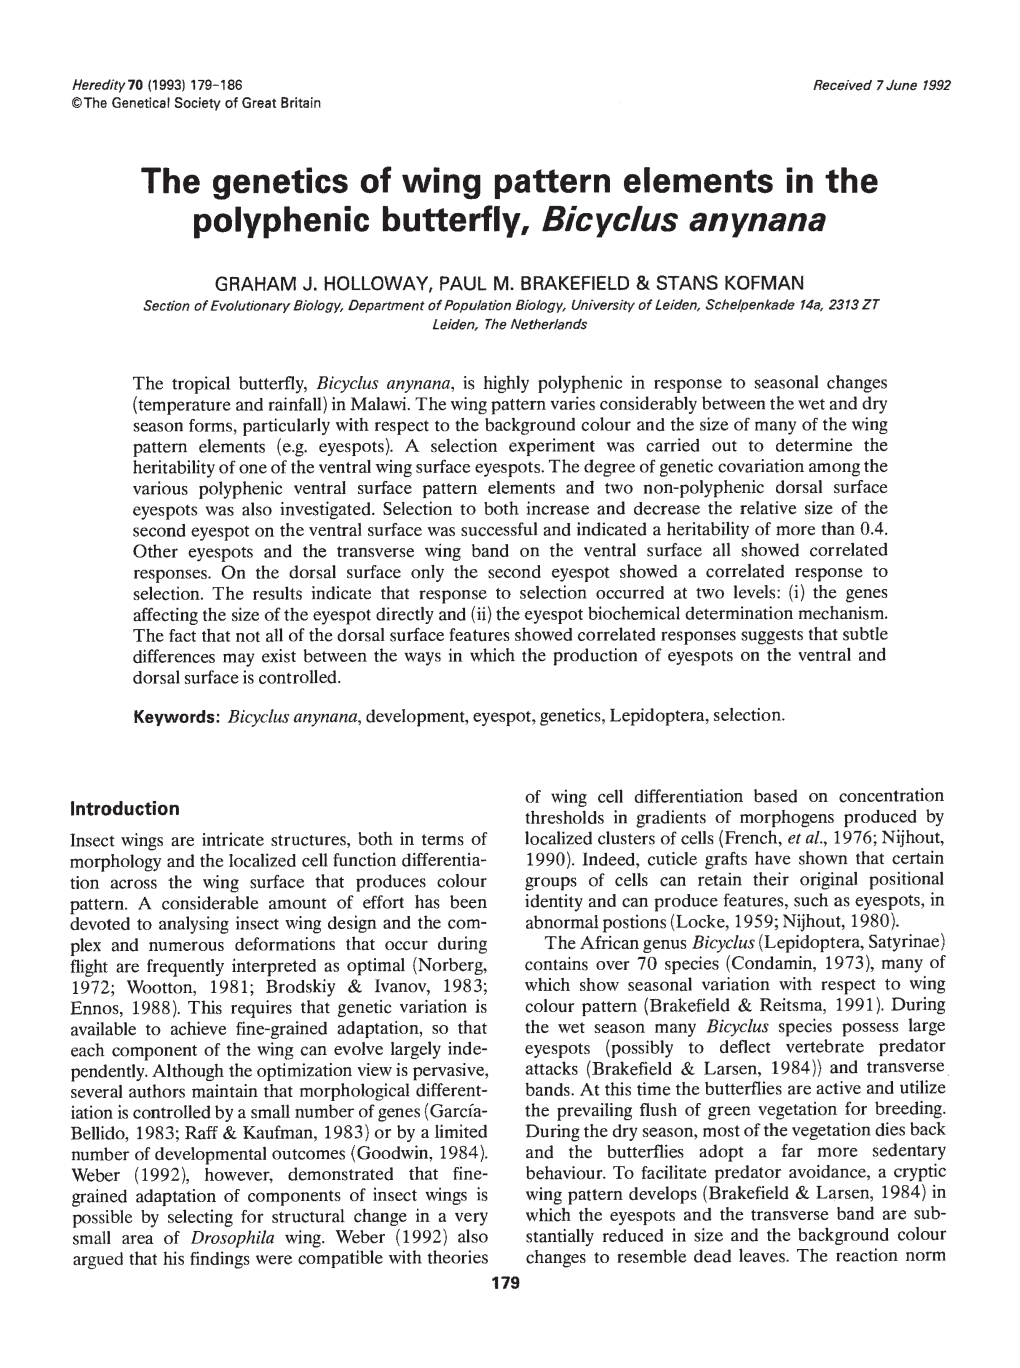 The Genetics of Wing Pattern Elements in the Polyphenic Butterfly, Bicyclus Anynana